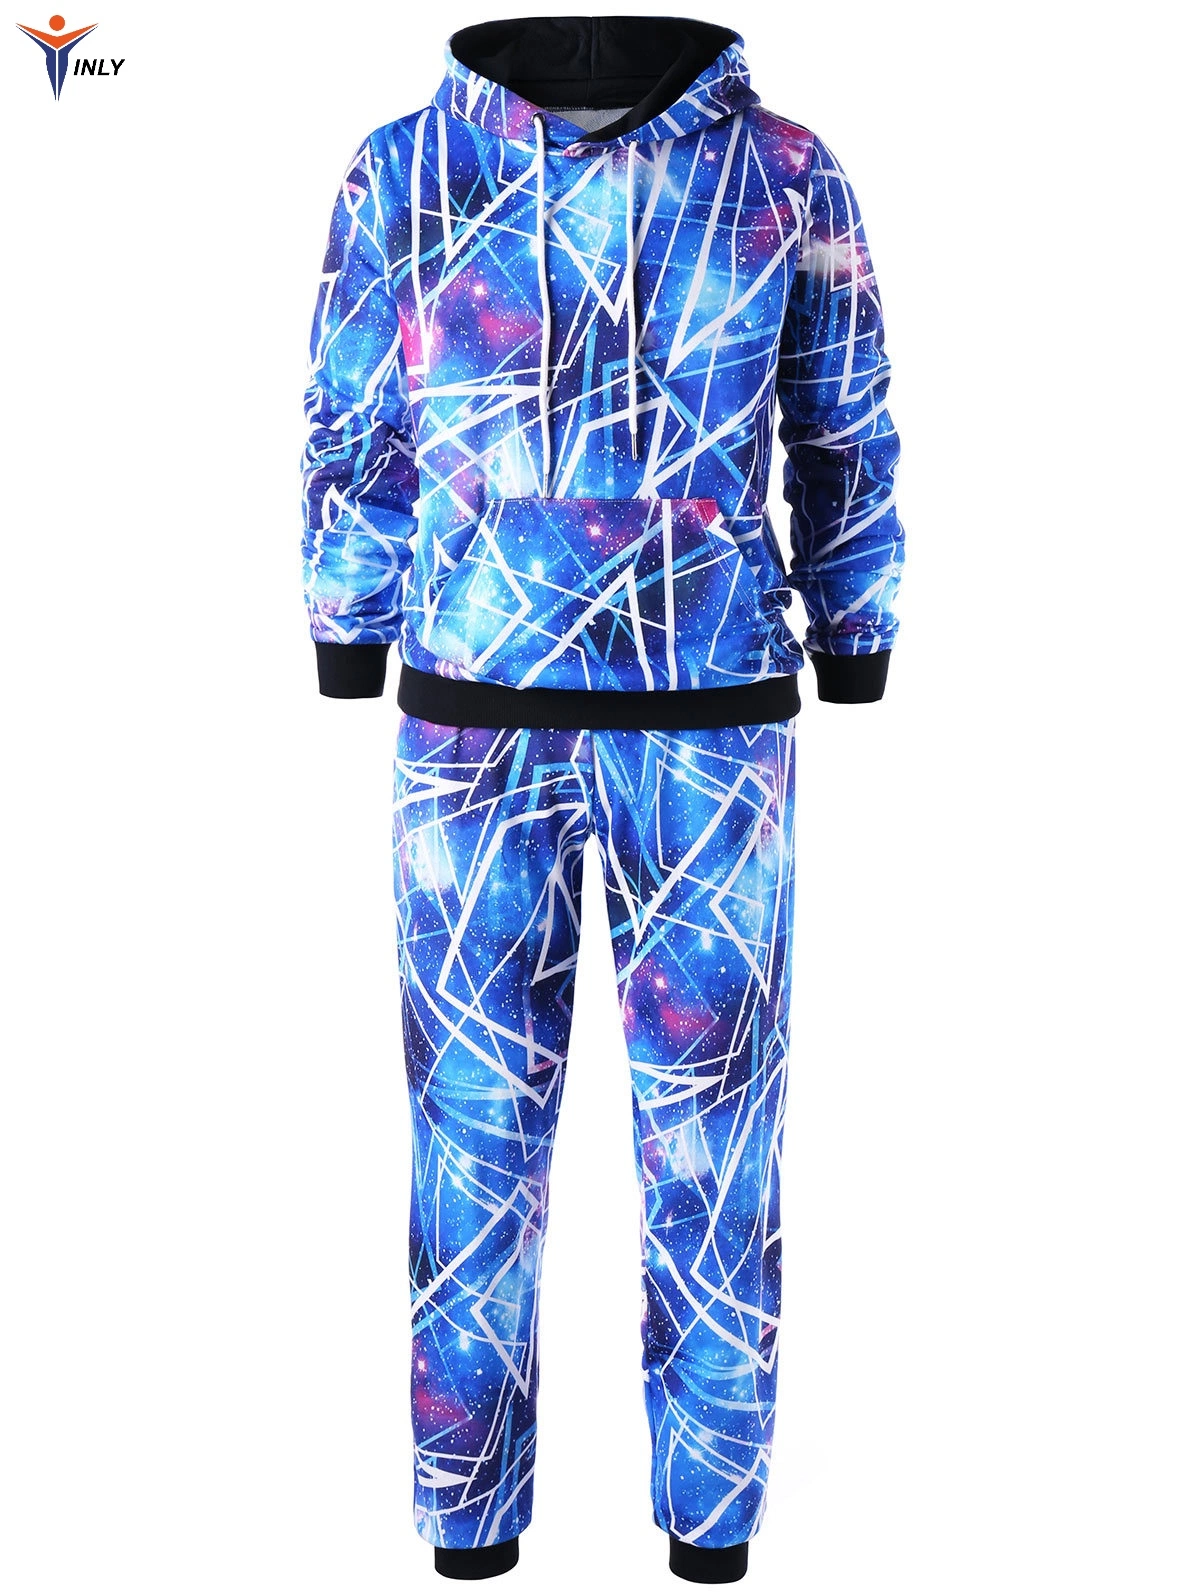 Custom Design High Quality Polyester Fashion Digital Printing Sublimation Two-Piece Set United States 2PCS Men's Sweater Pants Casual Sweatsuits Suit